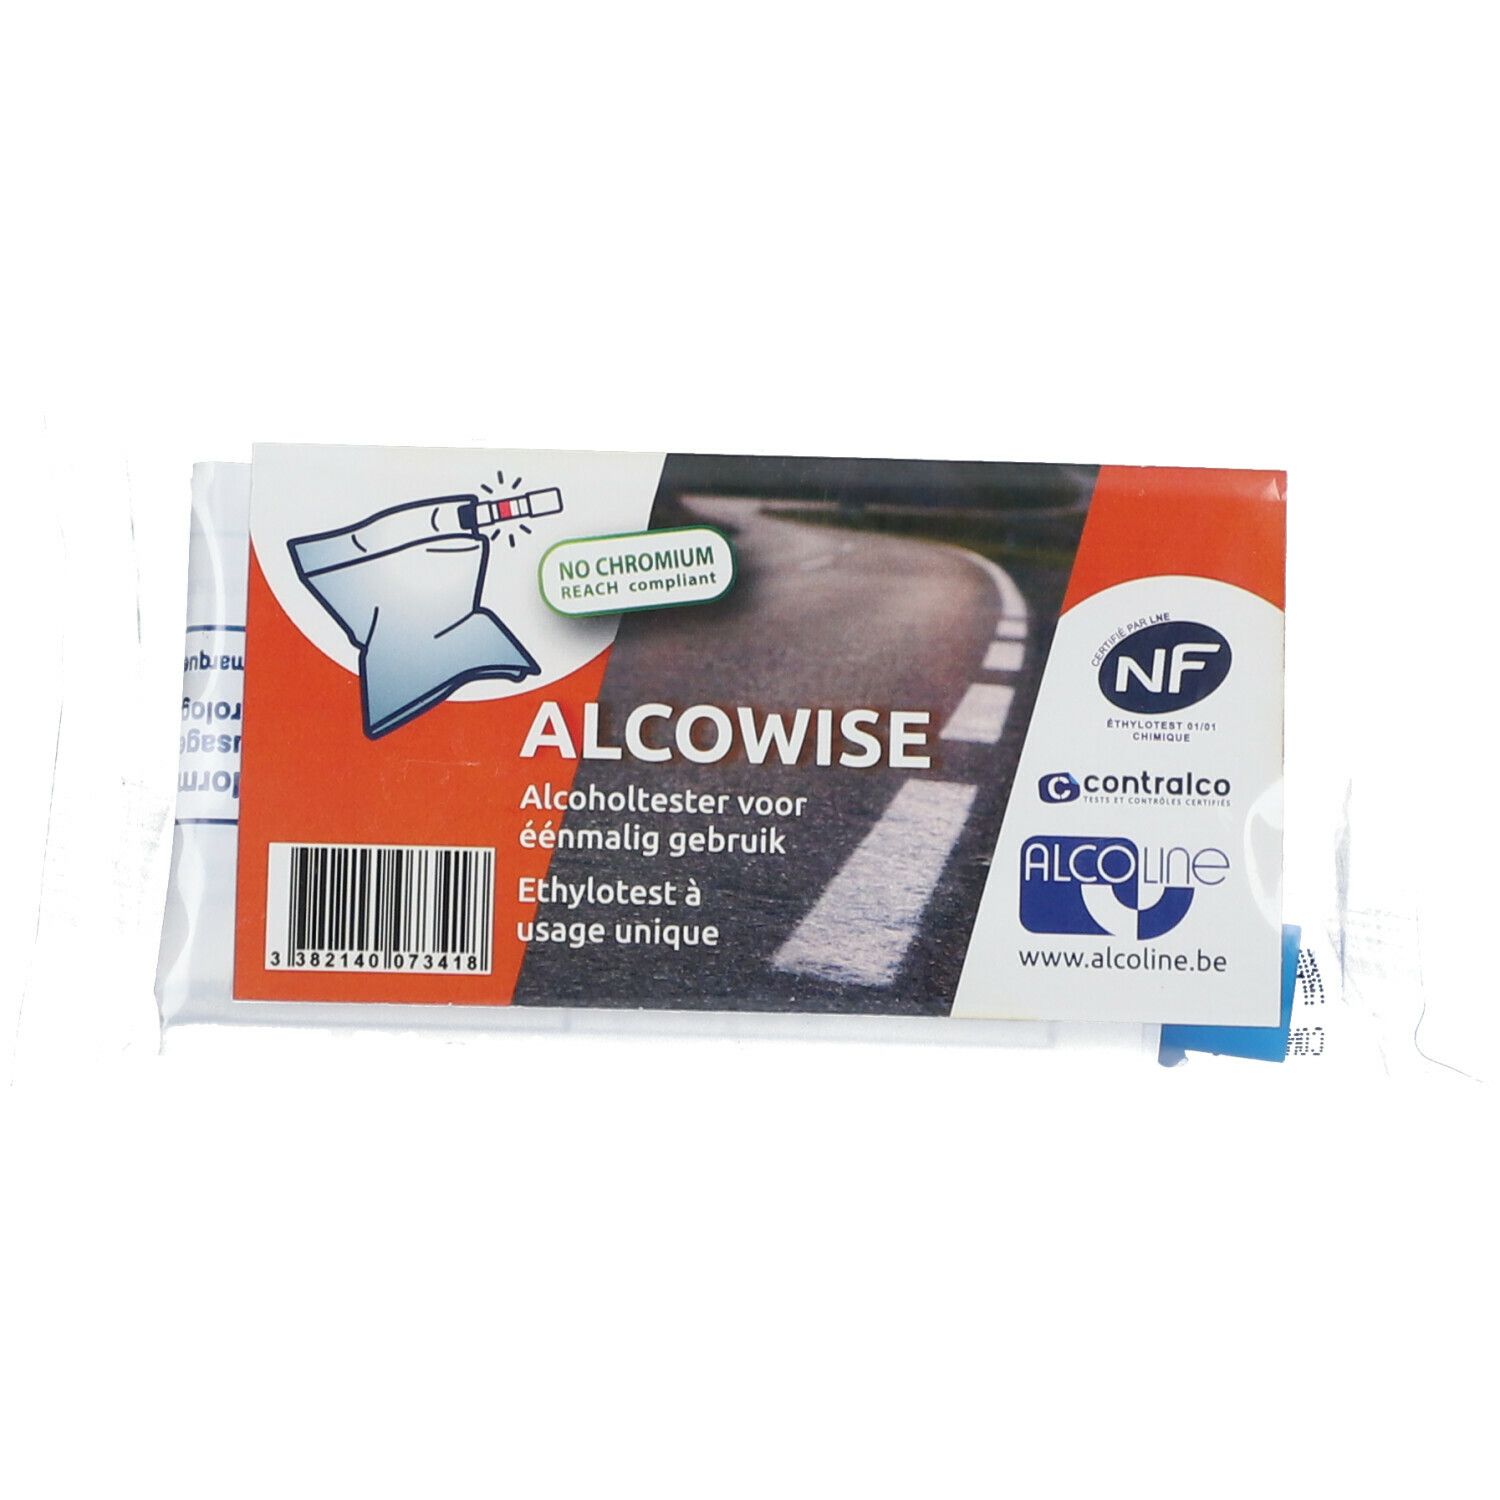 Alcowise Ethylotest Wis001